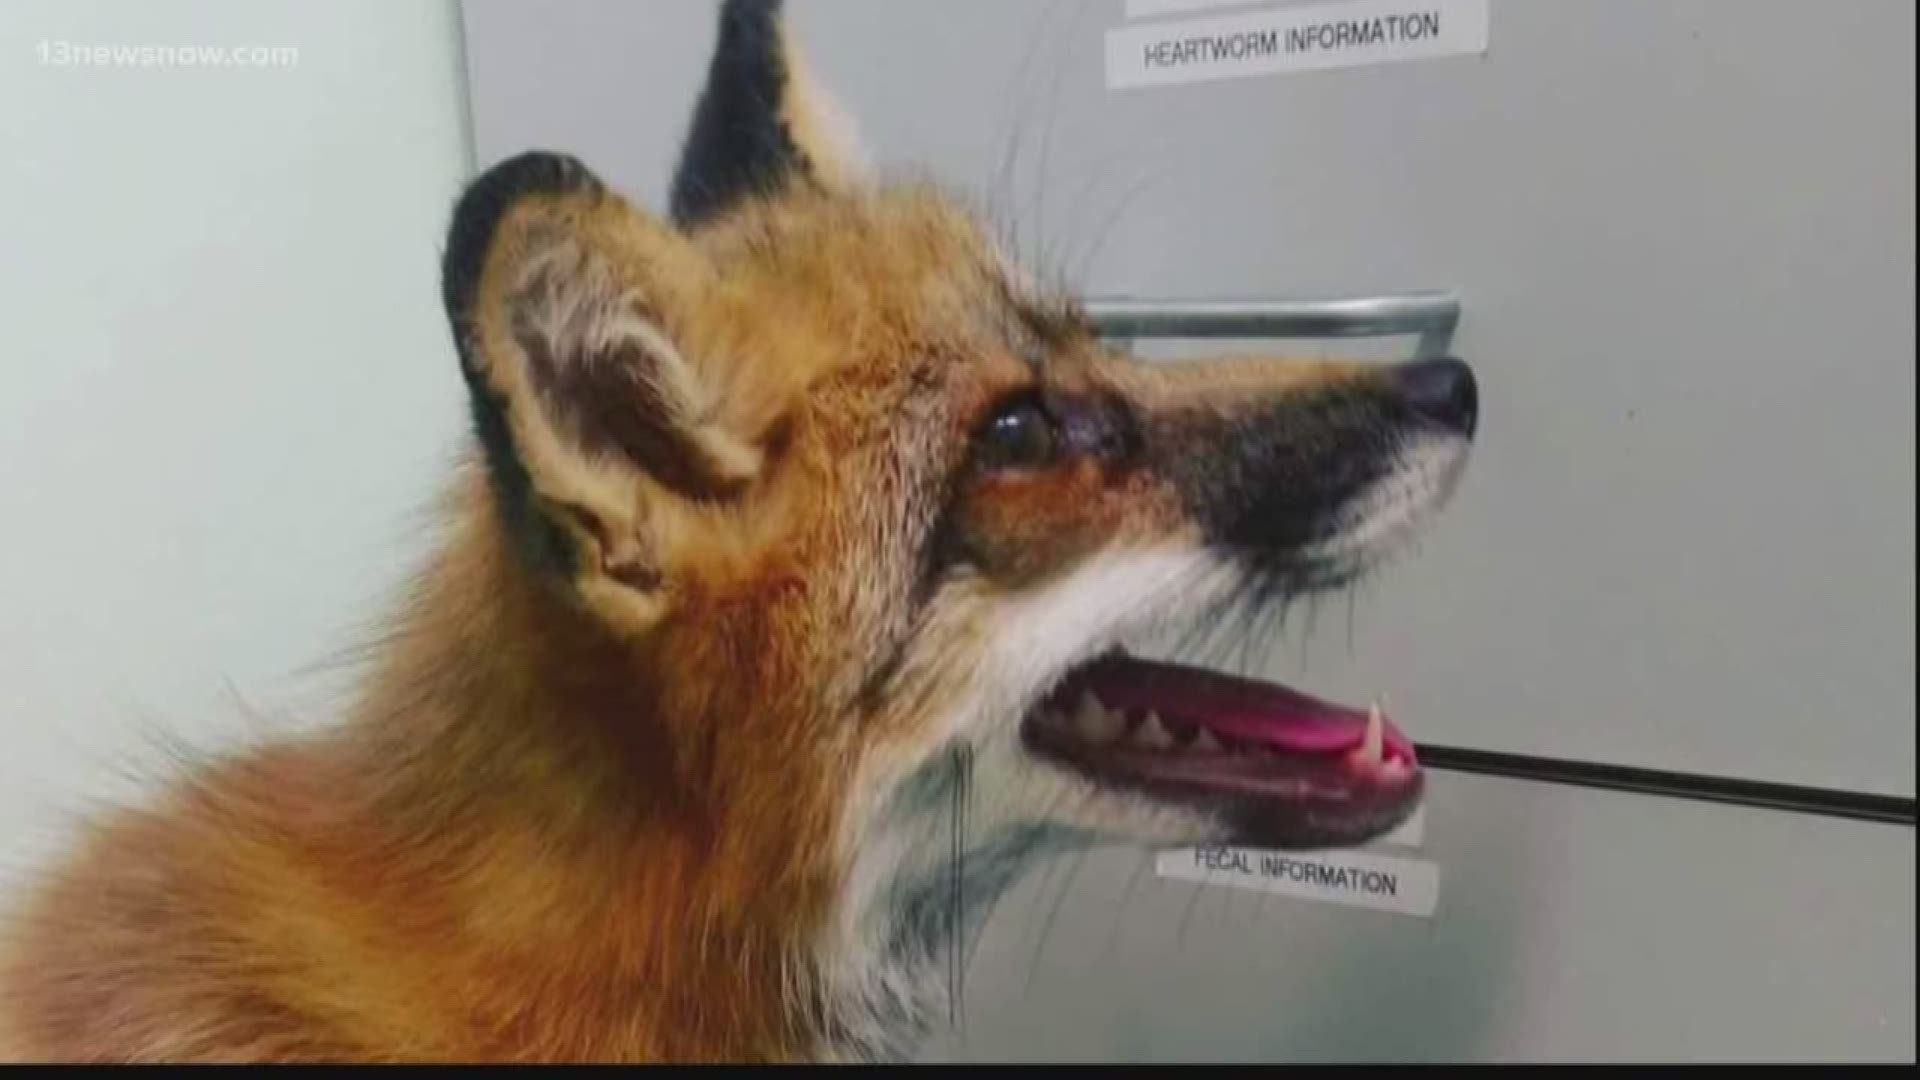 A woman in Chesapeake has lost her pet fox. She's even more concerned because the fox has brain damage. She's offering $800 to anyone who finds him.